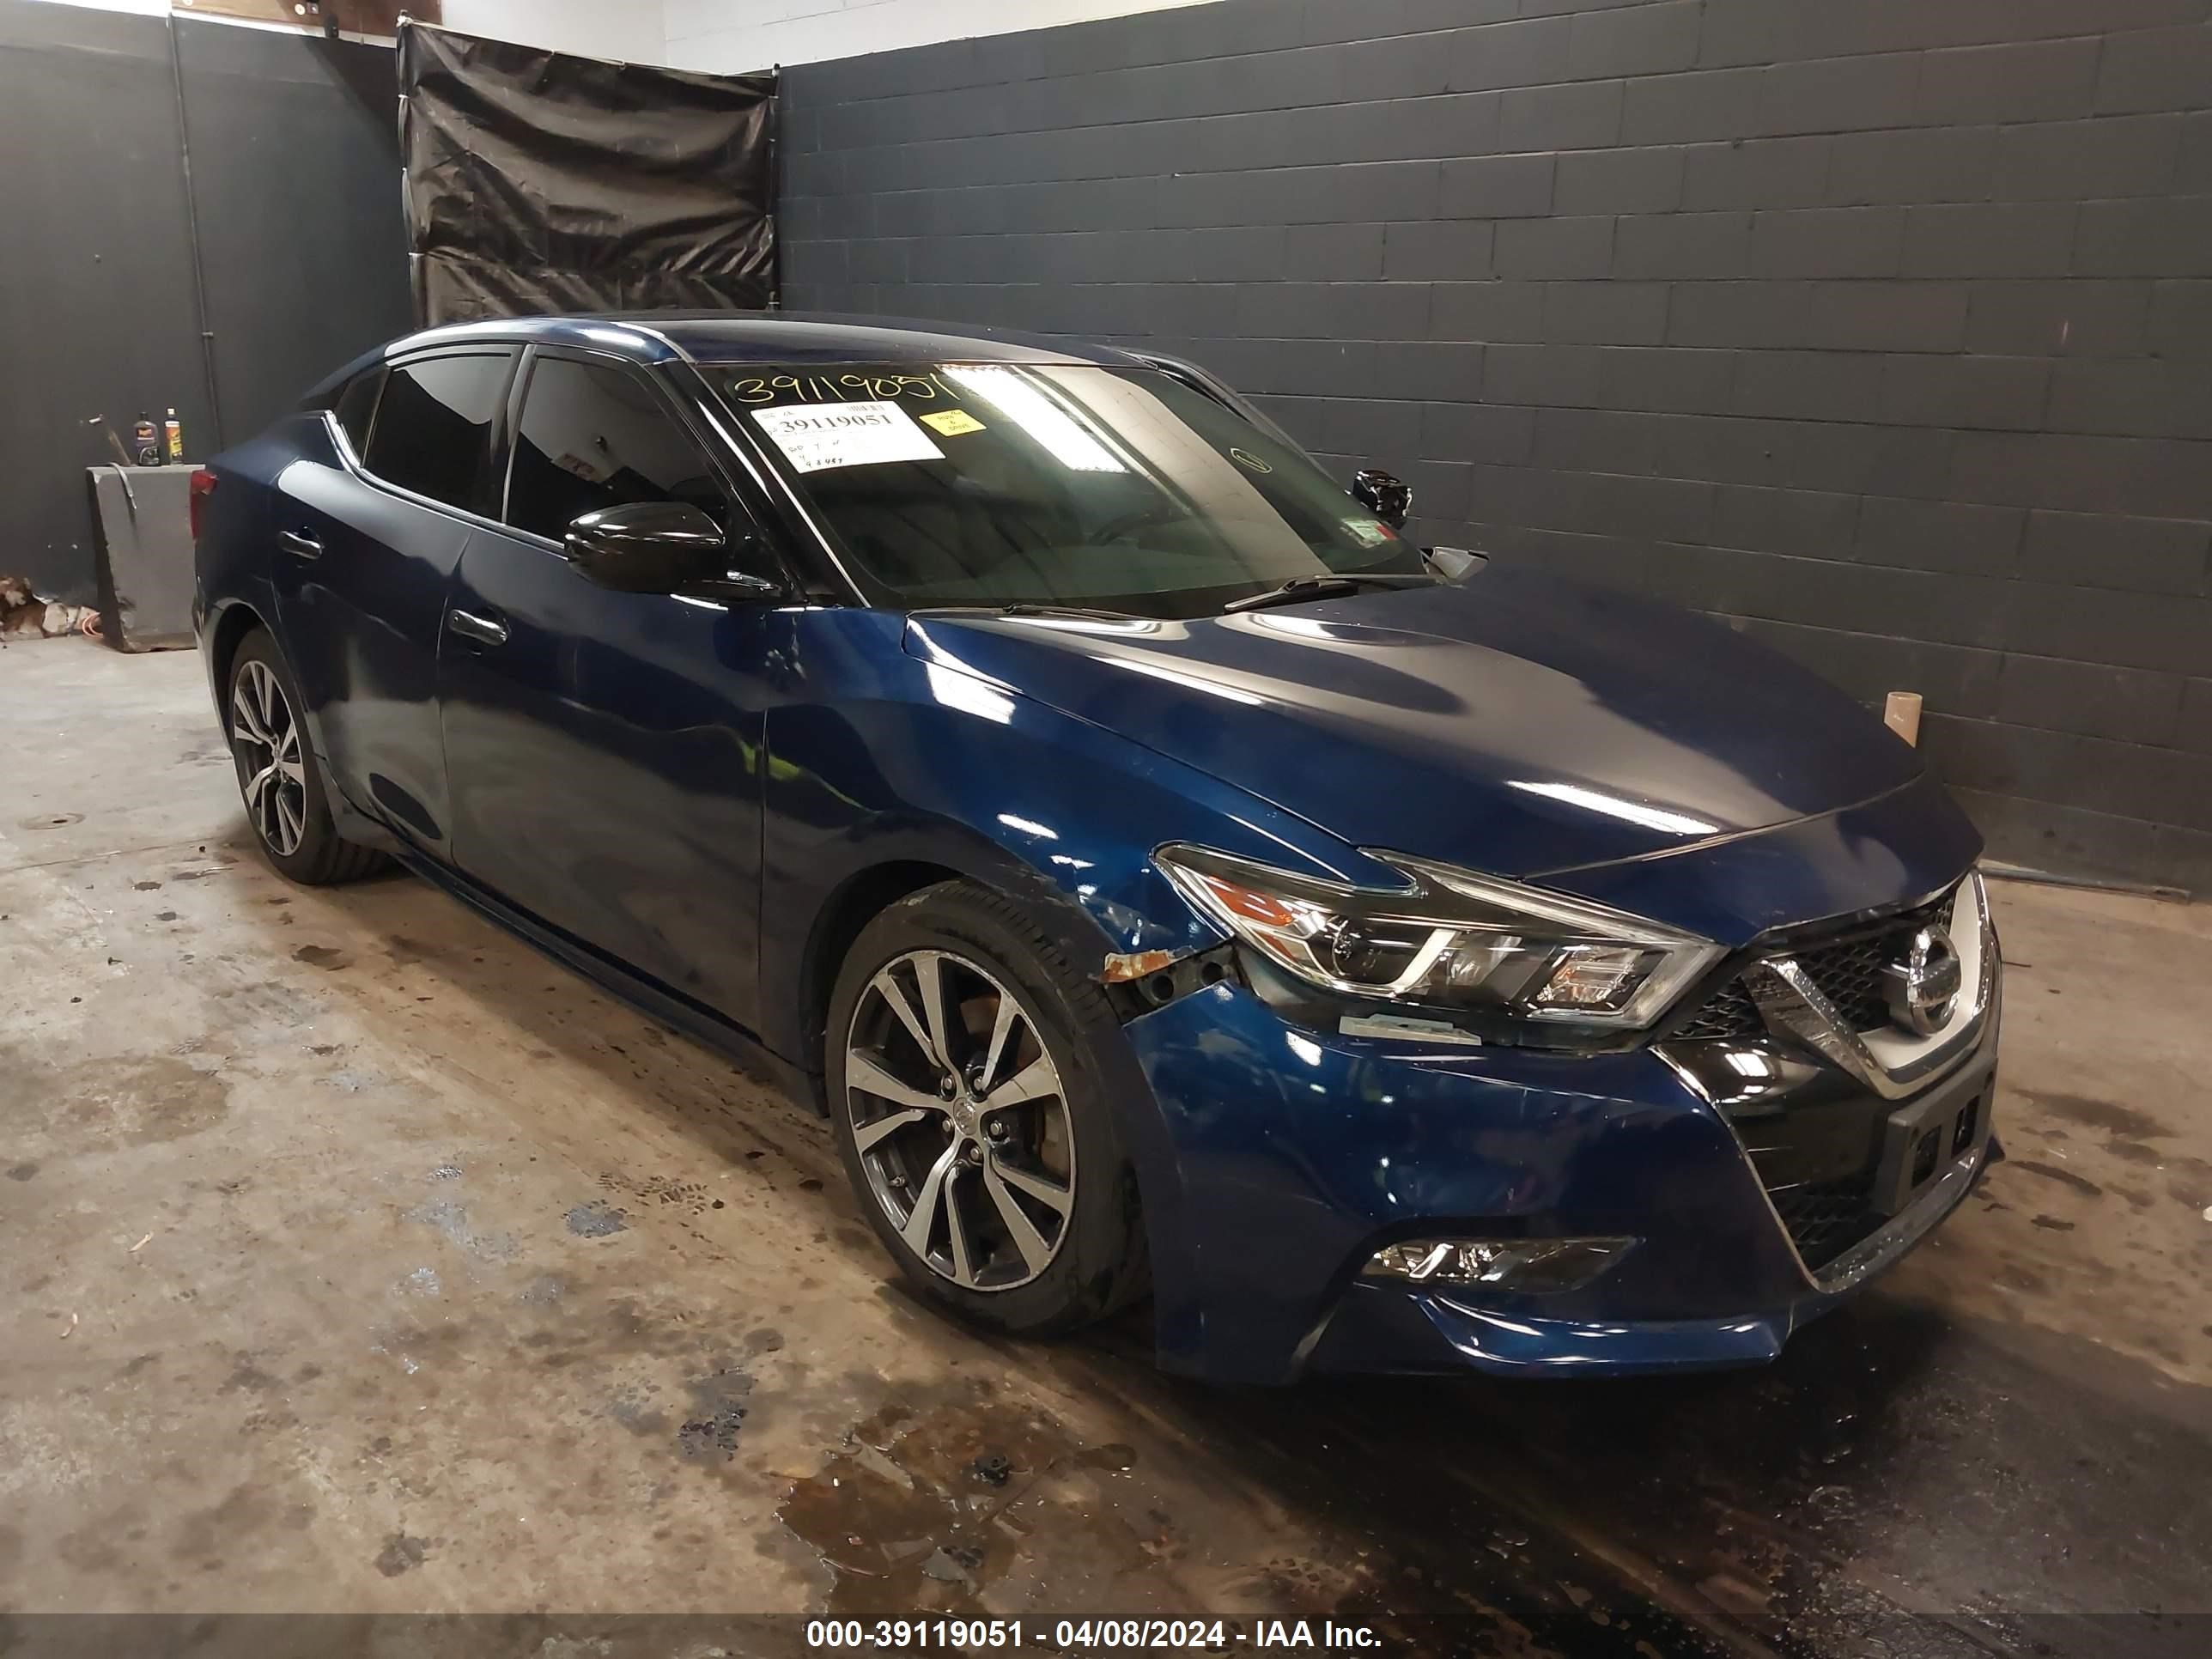 vin: 1N4AA6AP6GC380153 1N4AA6AP6GC380153 2016 nissan maxima 3500 for Sale in 11763, 66 Peconic Ave, Medford, New York, USA